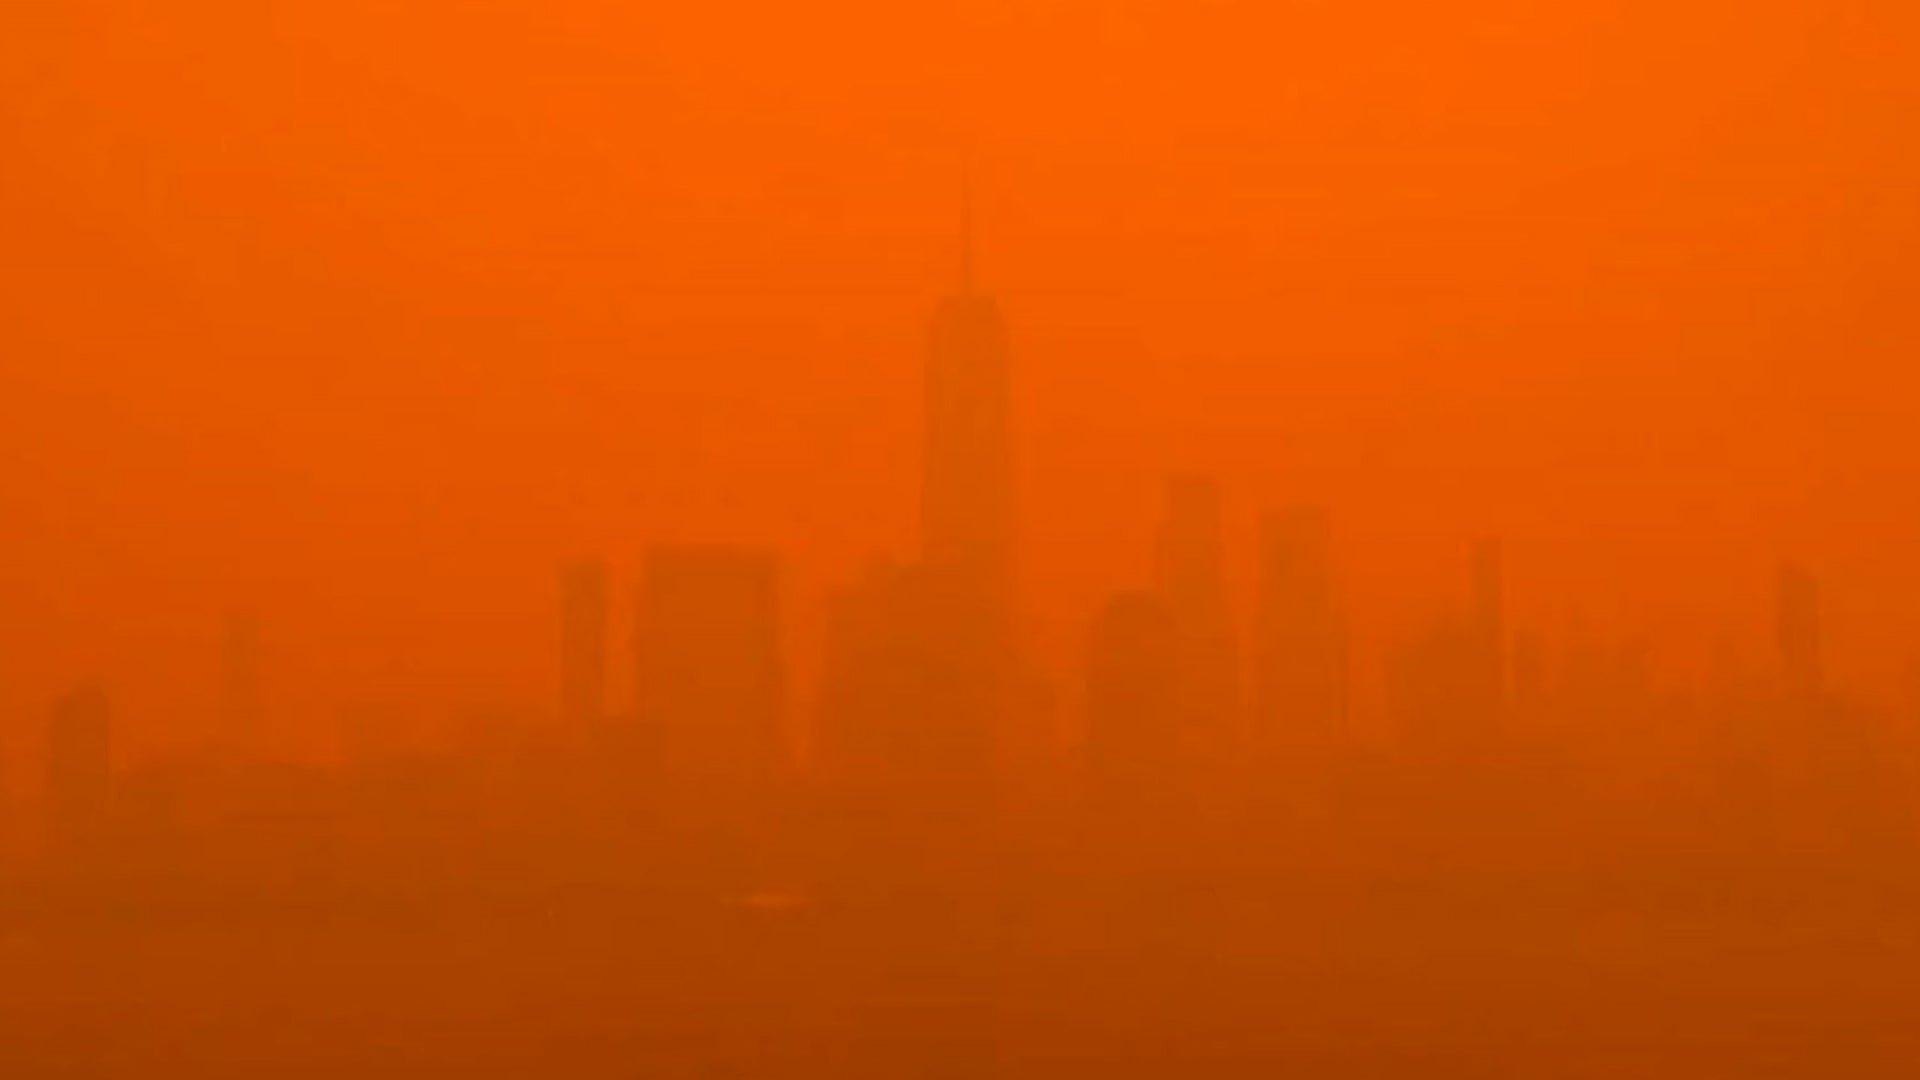 Apocalyptic　time-lapse　York　News　orange　disappear　shows　smoke　New　into　Independent　TV